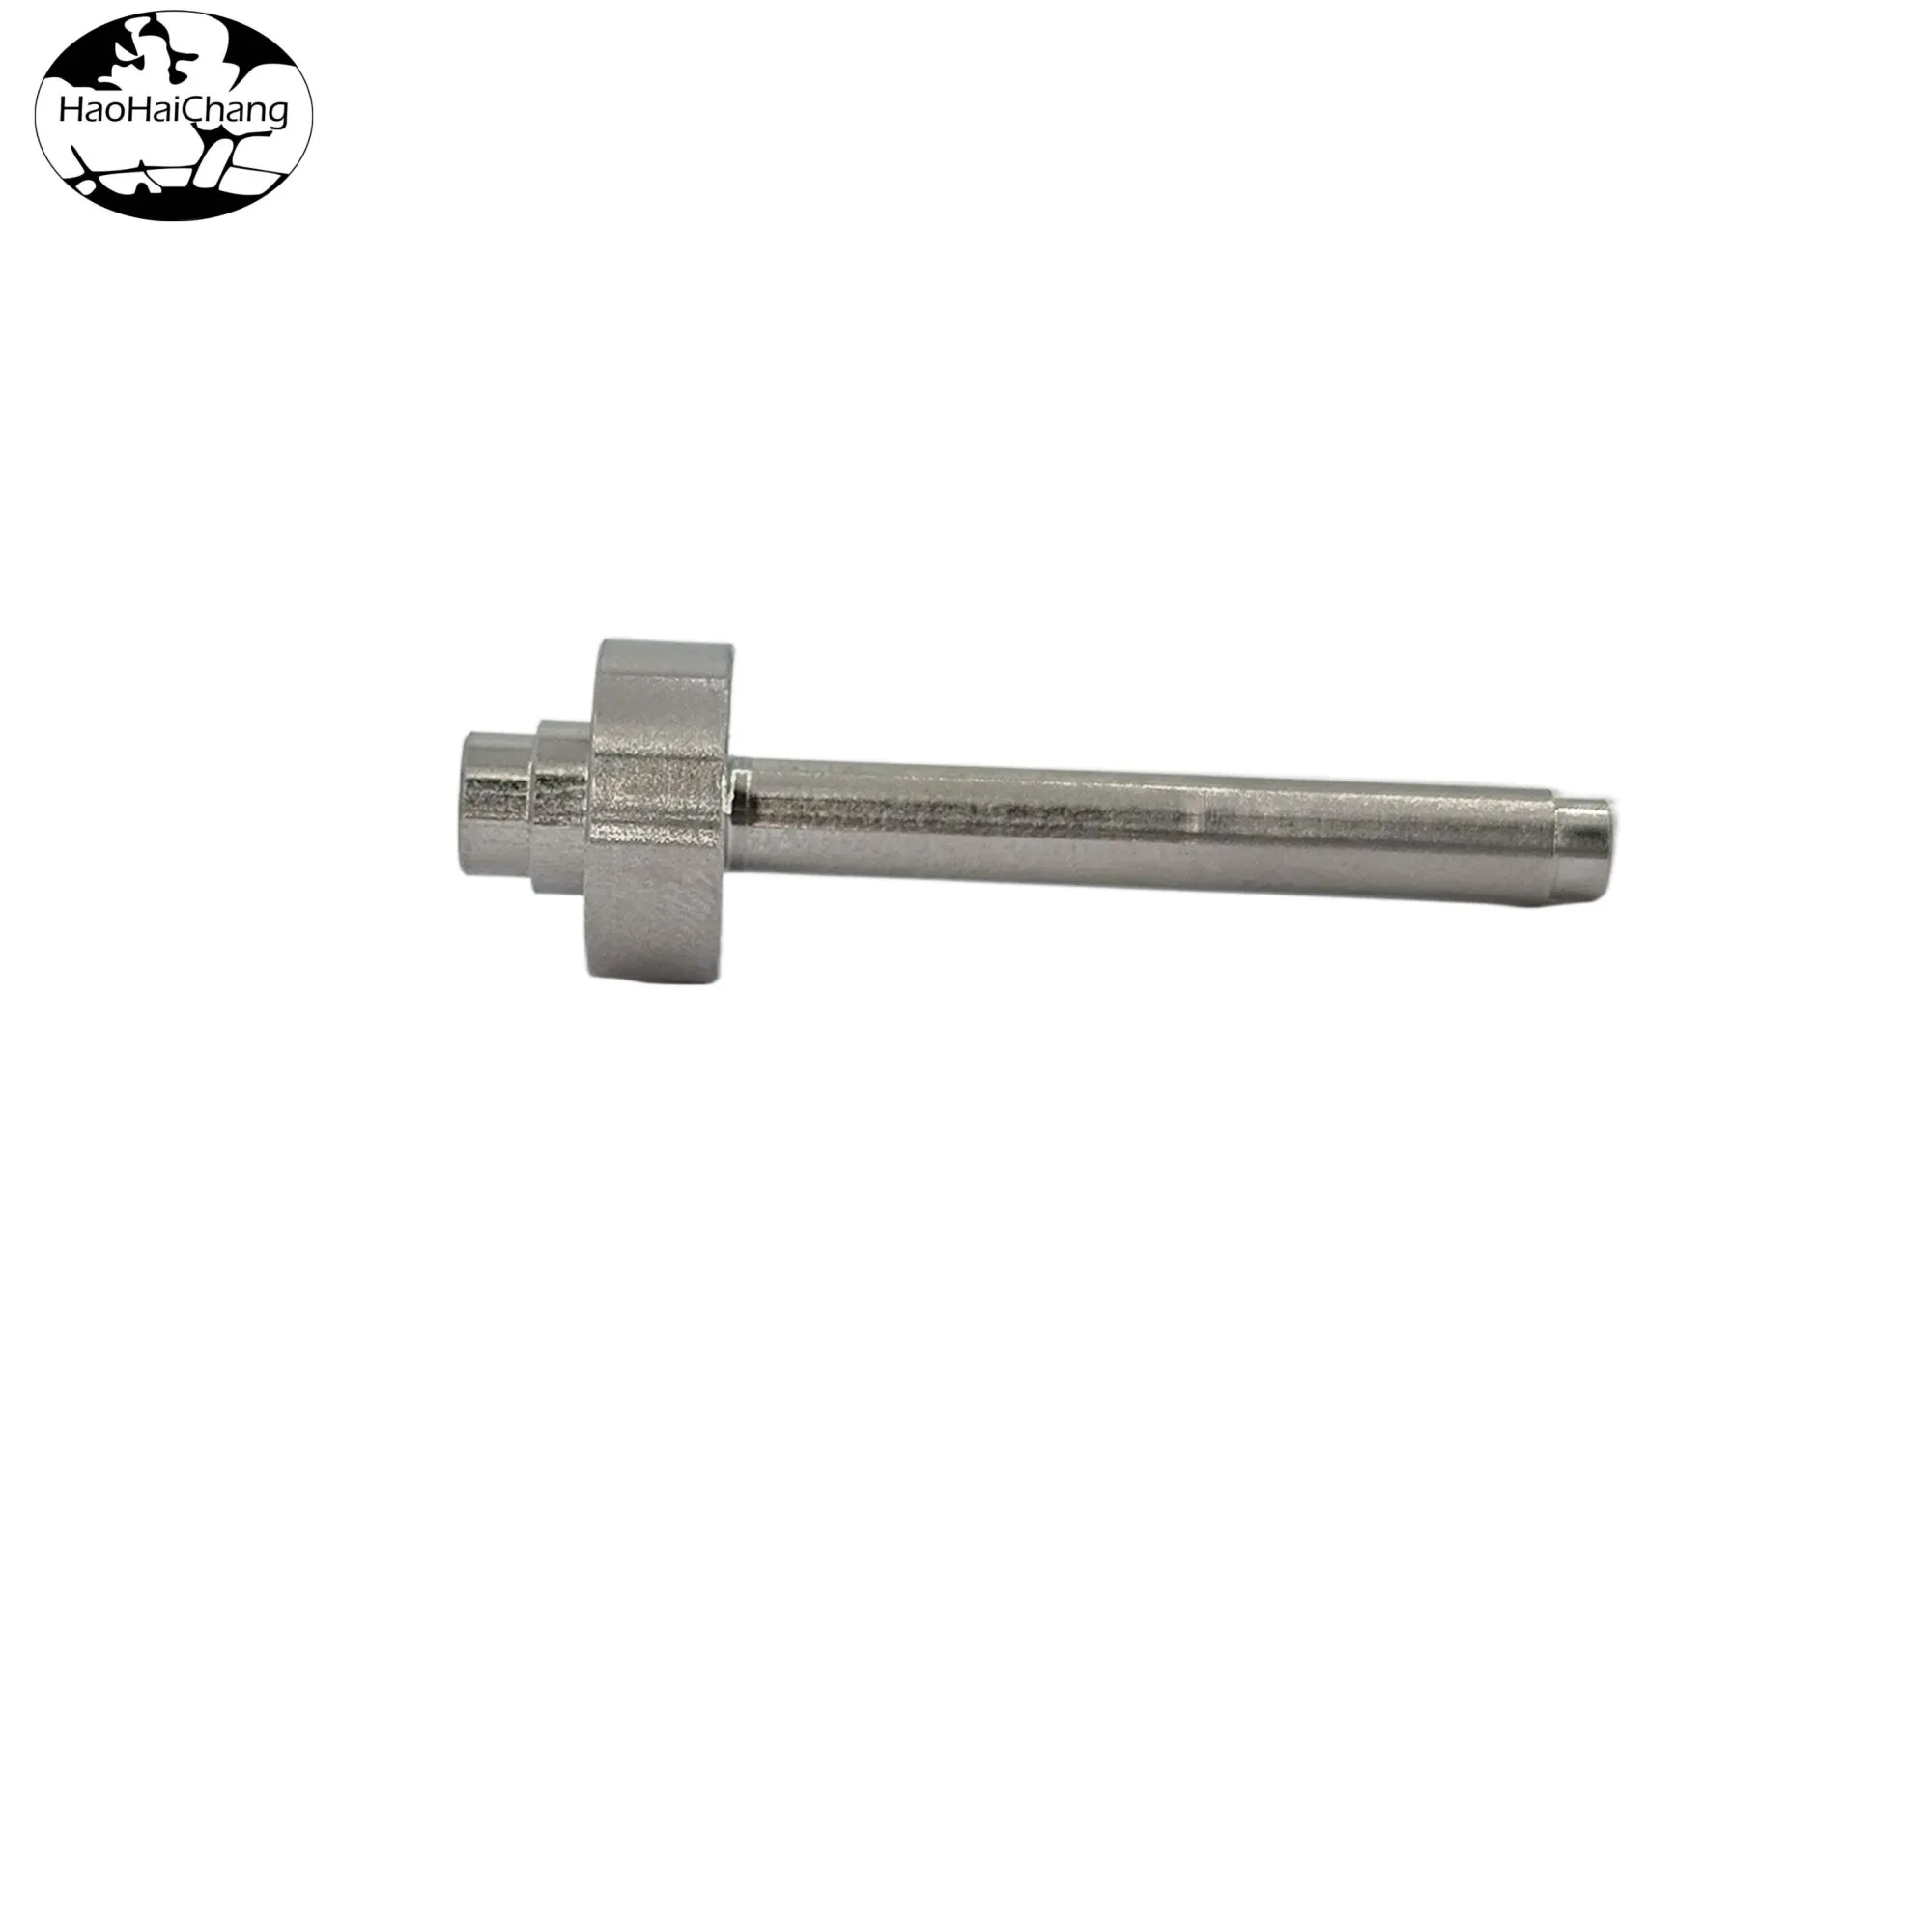 HHC-552 Stainless Steel Hollow Stepped Column Connecting Shaft